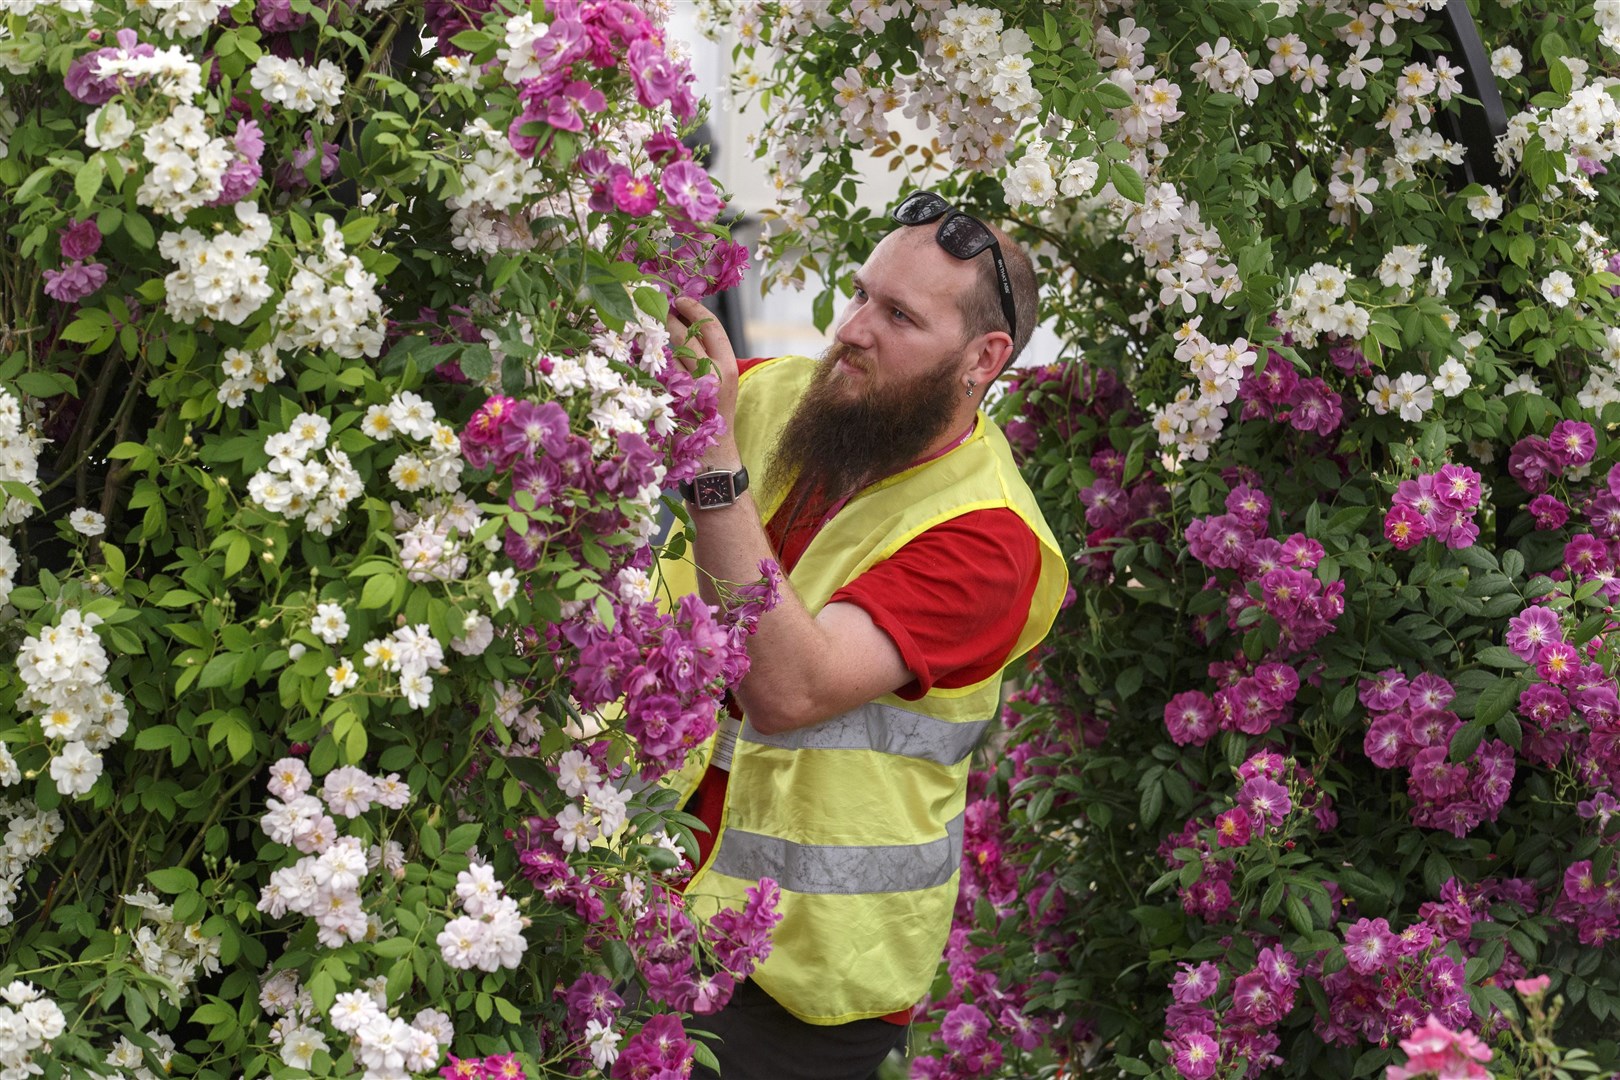 Andy Stogdon deadheads roses on the Peter Beales Roses exhibition stand (Luke MacGregor/RHS/PA)